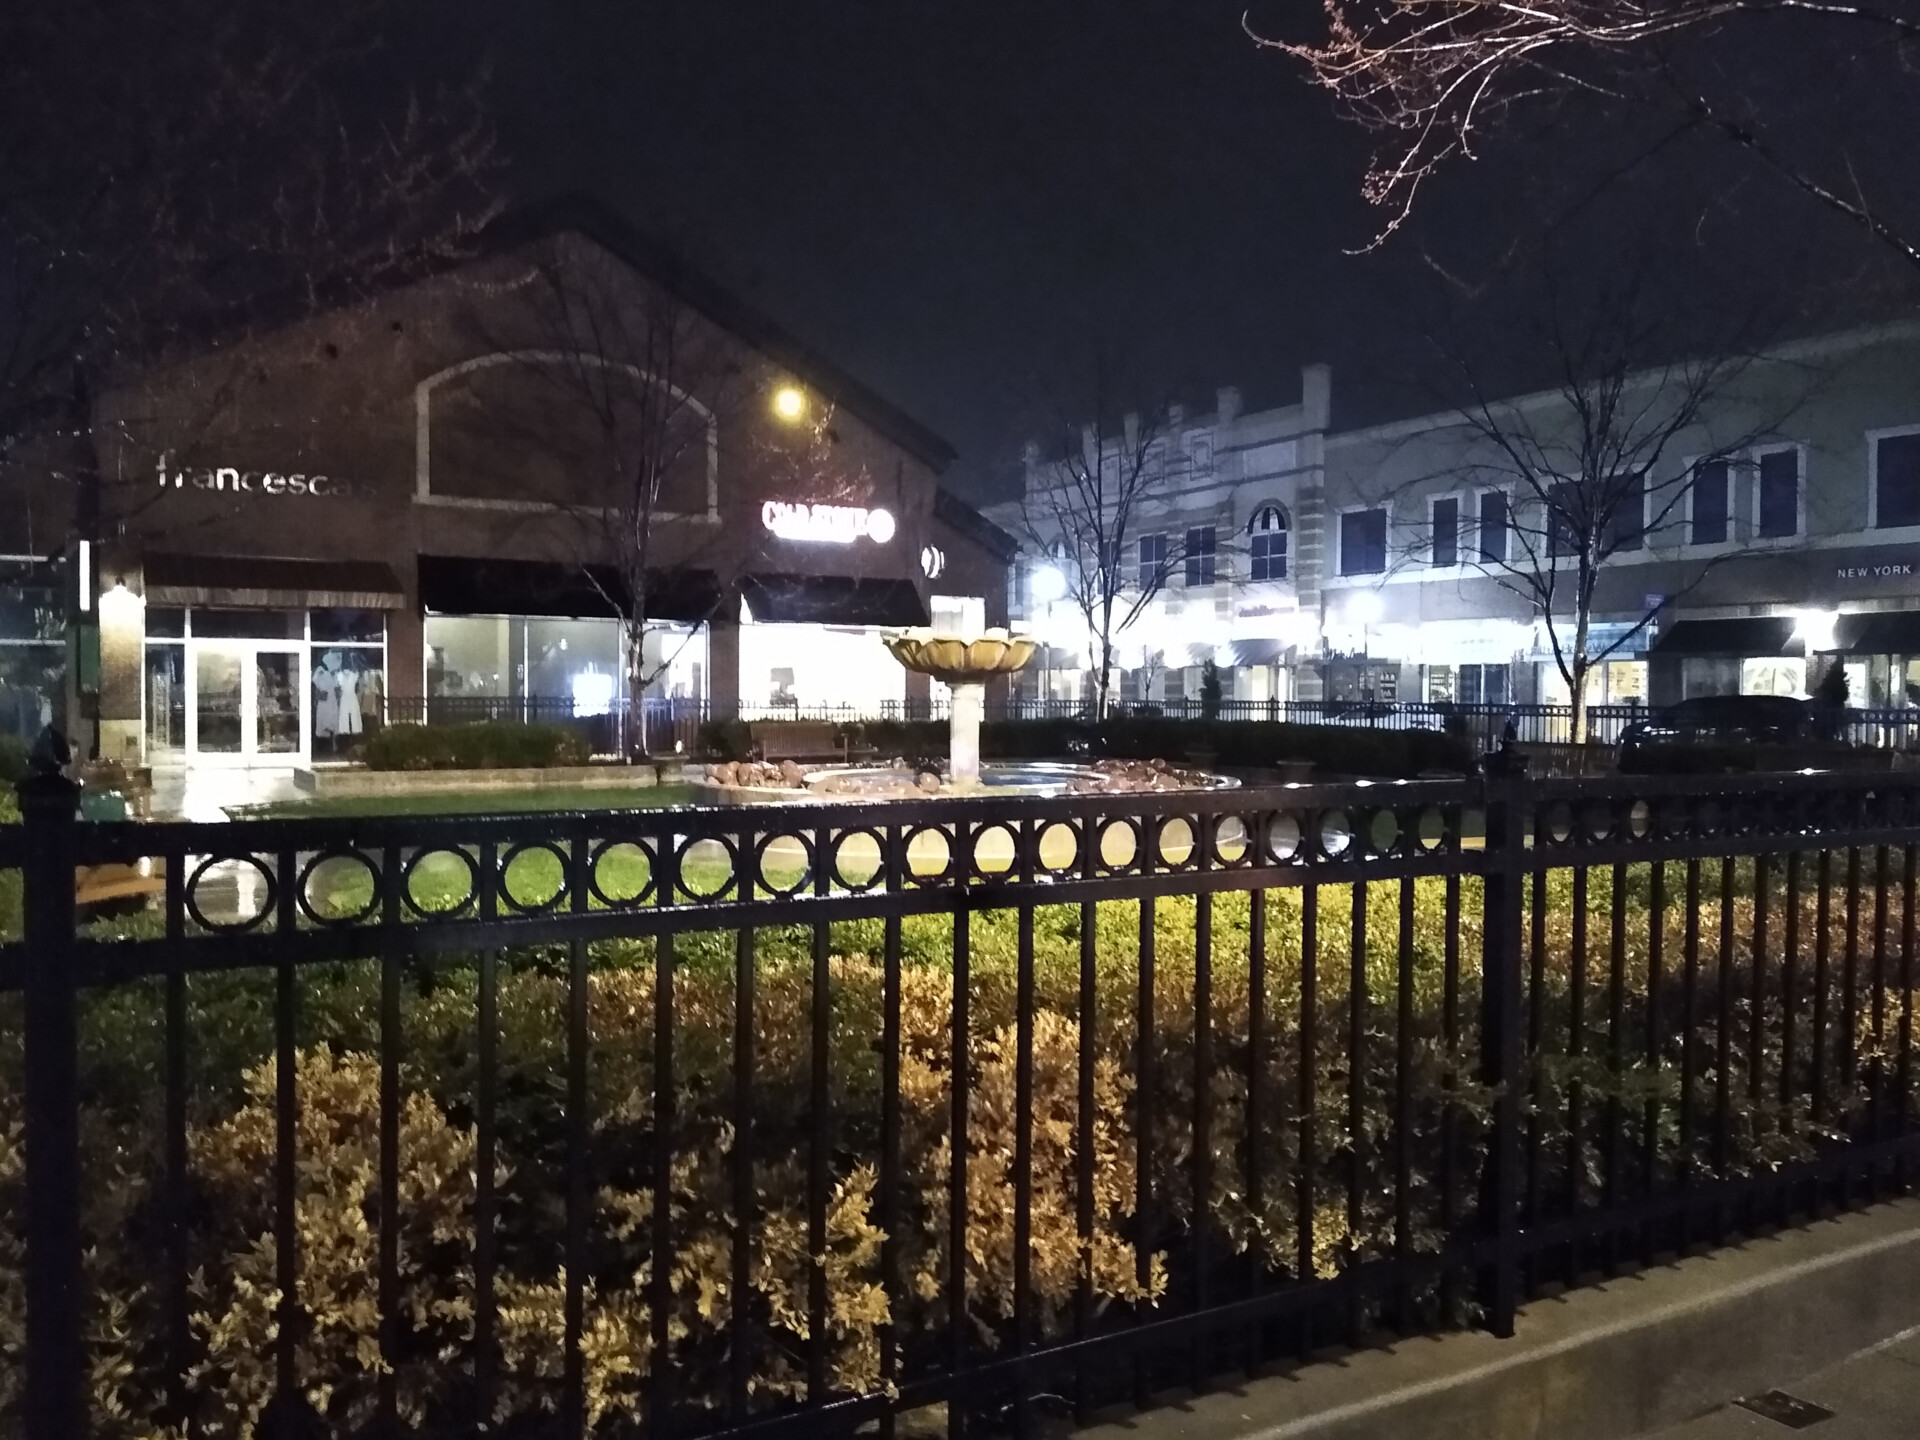 Moto G7 Power Review camera sample outdoors night time